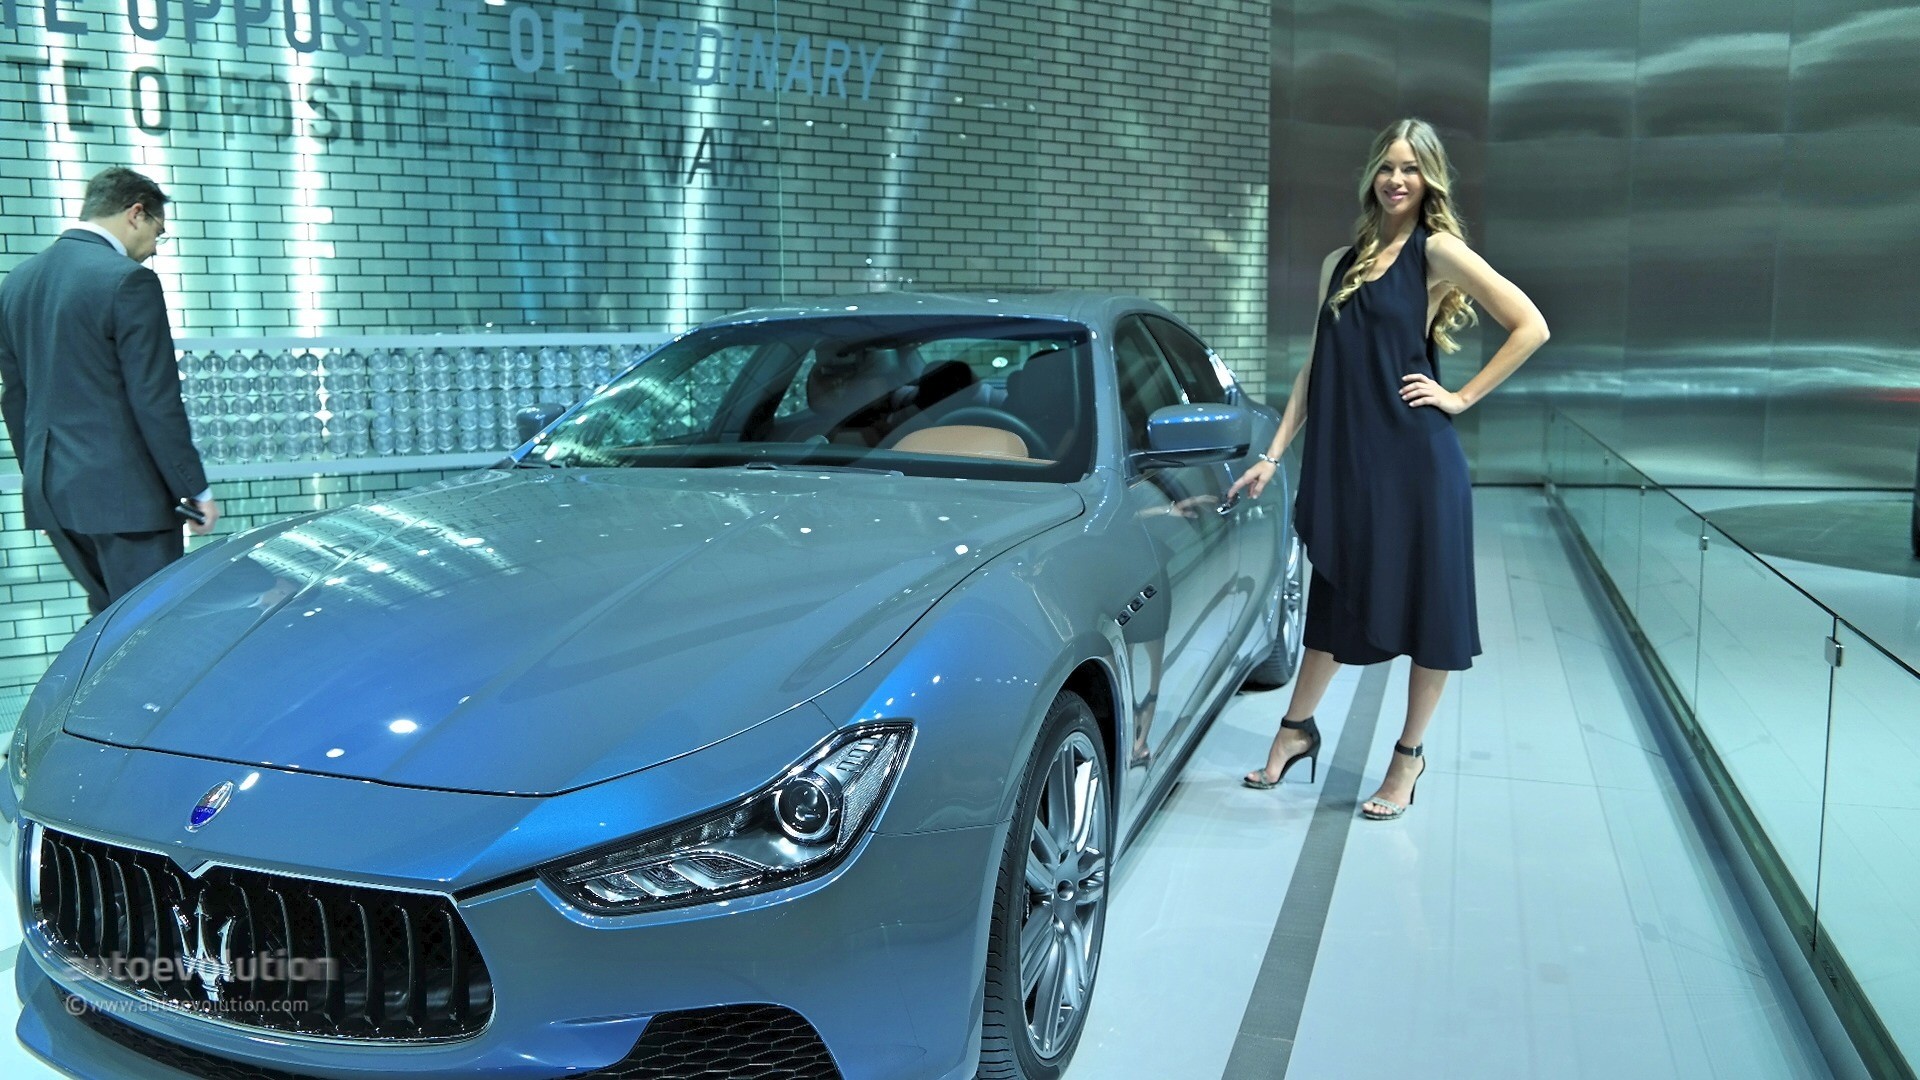 http://s1.cdn.autoevolution.com/images/news/gallery/girls-of-the-2015-detroit-auto-show-photo-gallery_24.jpg